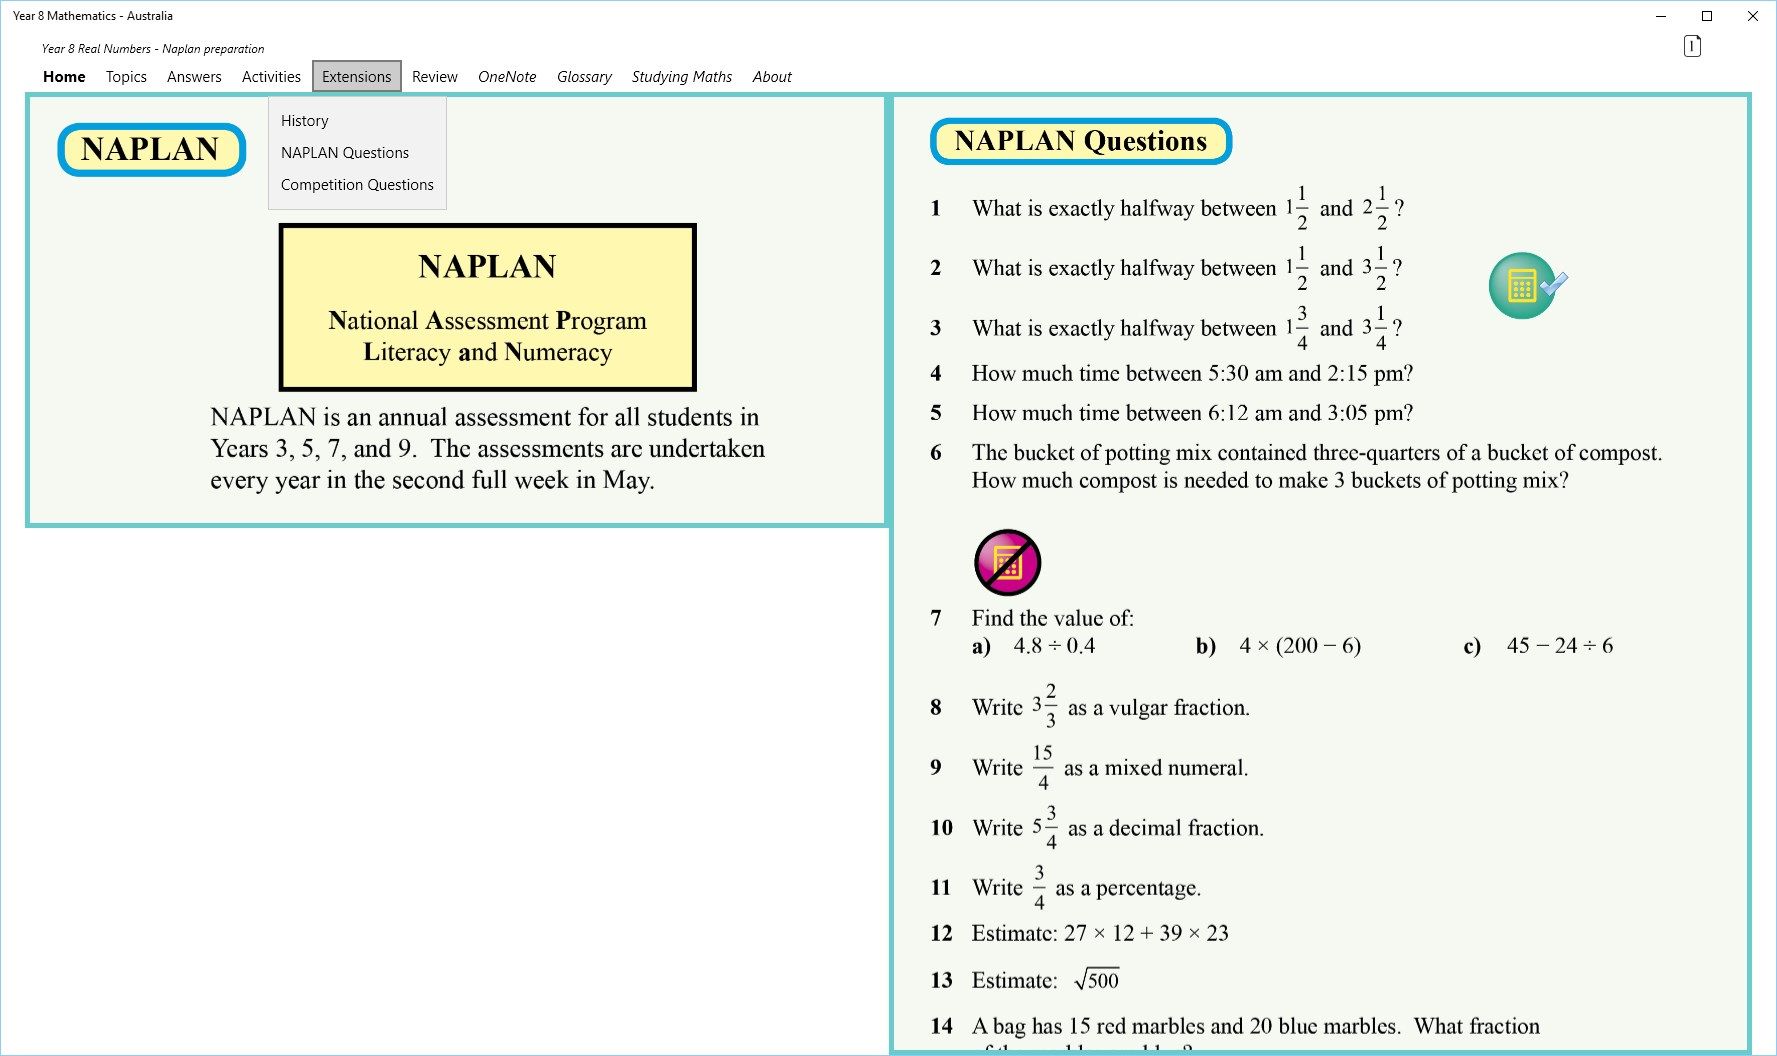 Extension activities such as mathematics competition, NAPLAN preparation, and mathematics history, directly related to the module, are available